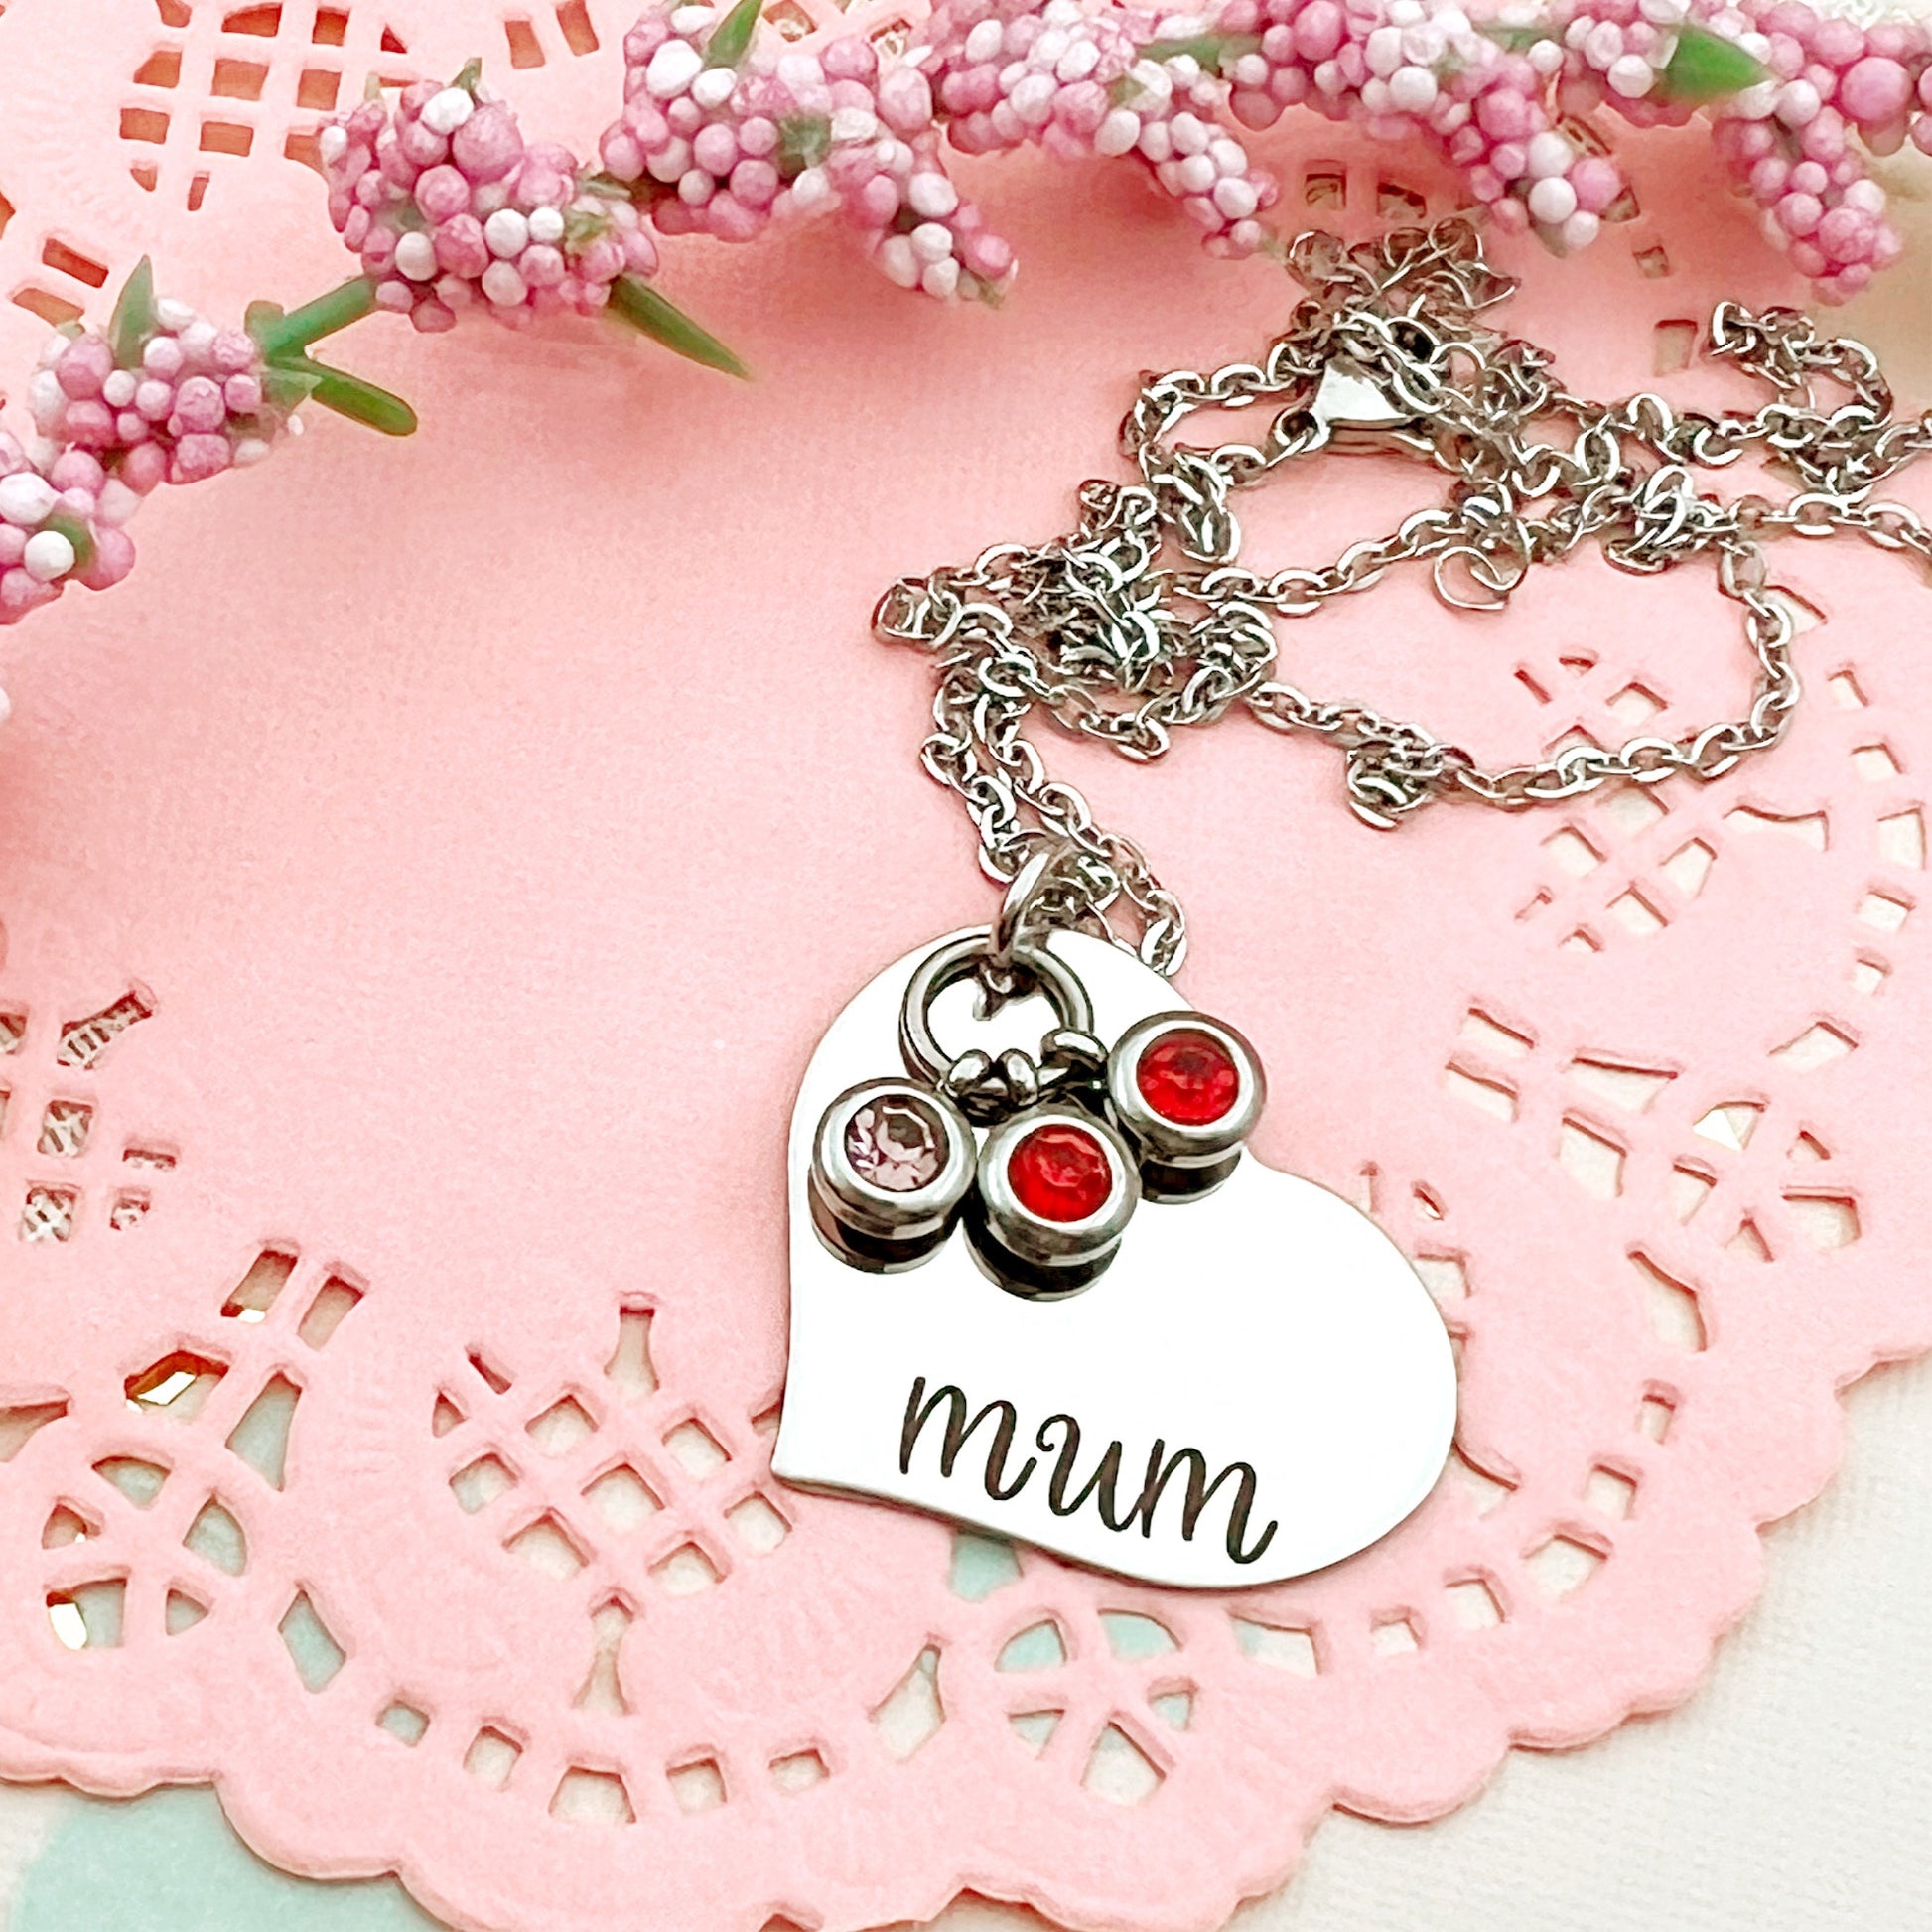 Top 6 Push Present Jewelry Ideas for New Moms – Helen Ficalora